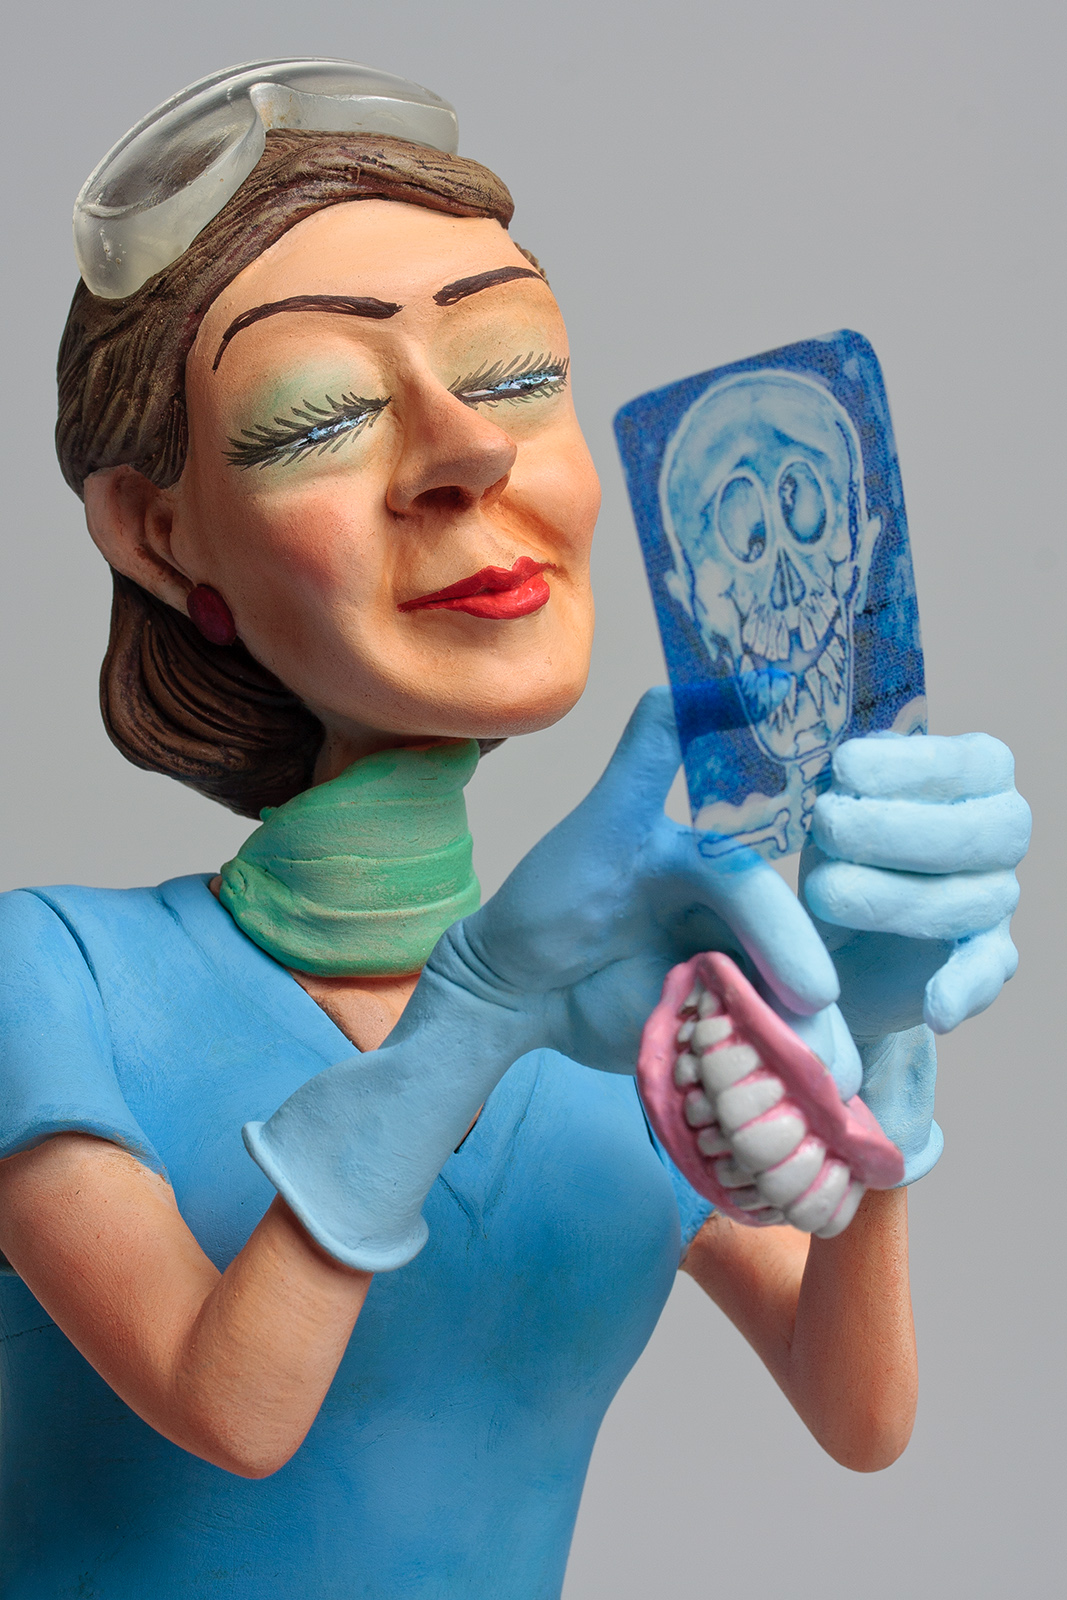 Guillermo Forchino Lady Dentist Miniature Figurines Gifts